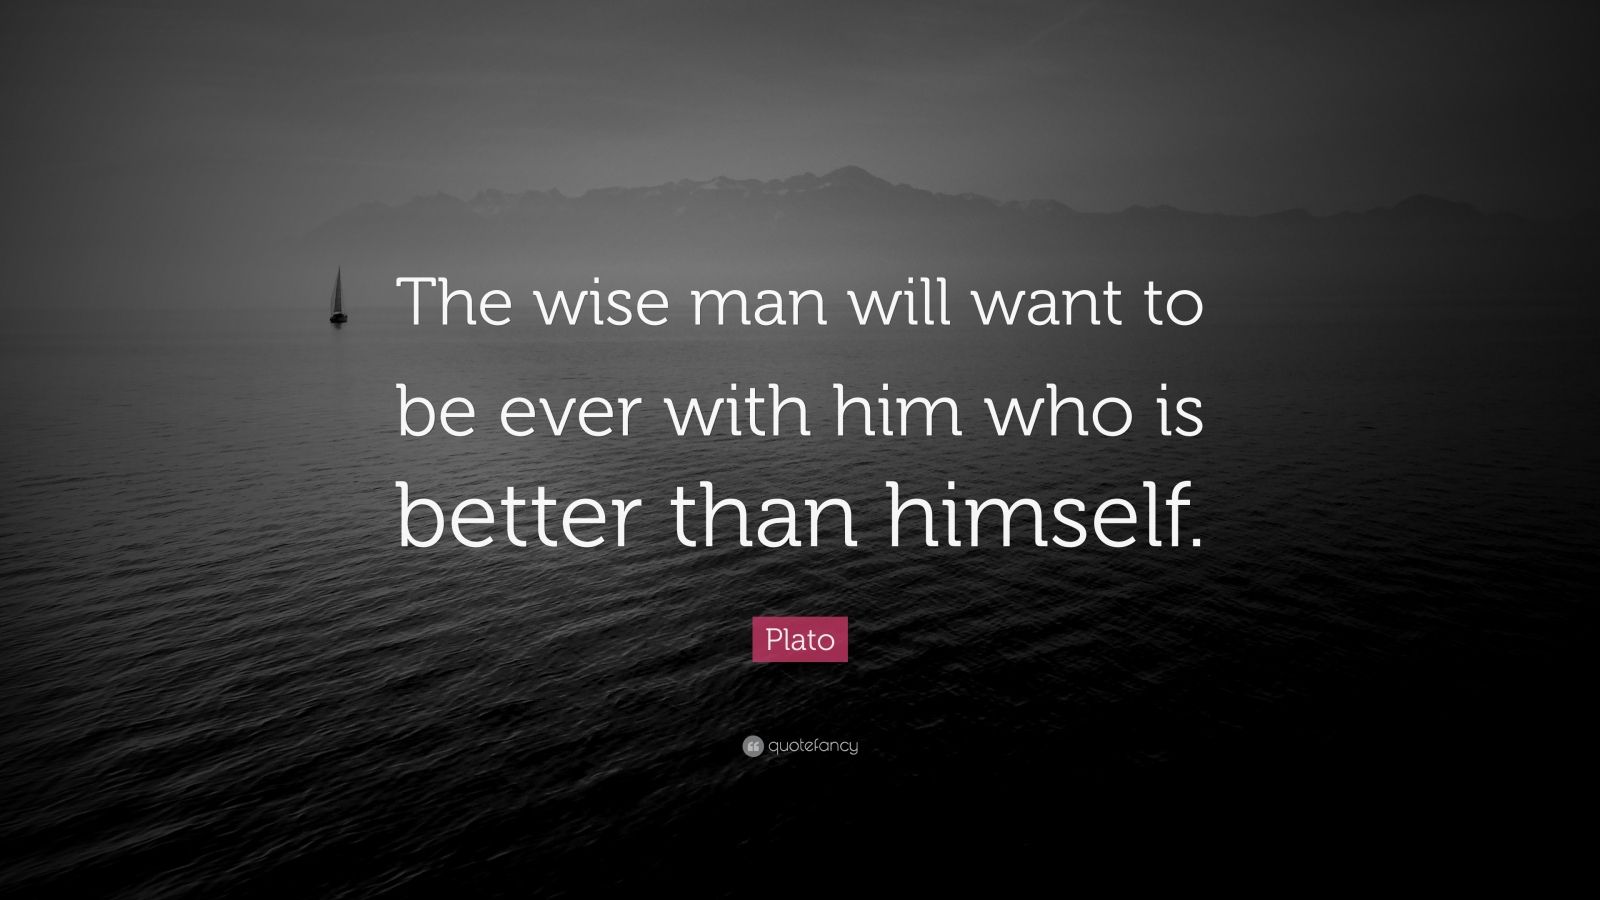 53859-Plato-Quote-The-wise-man-will-want-to-be-ever-with-him-who-is.jpg